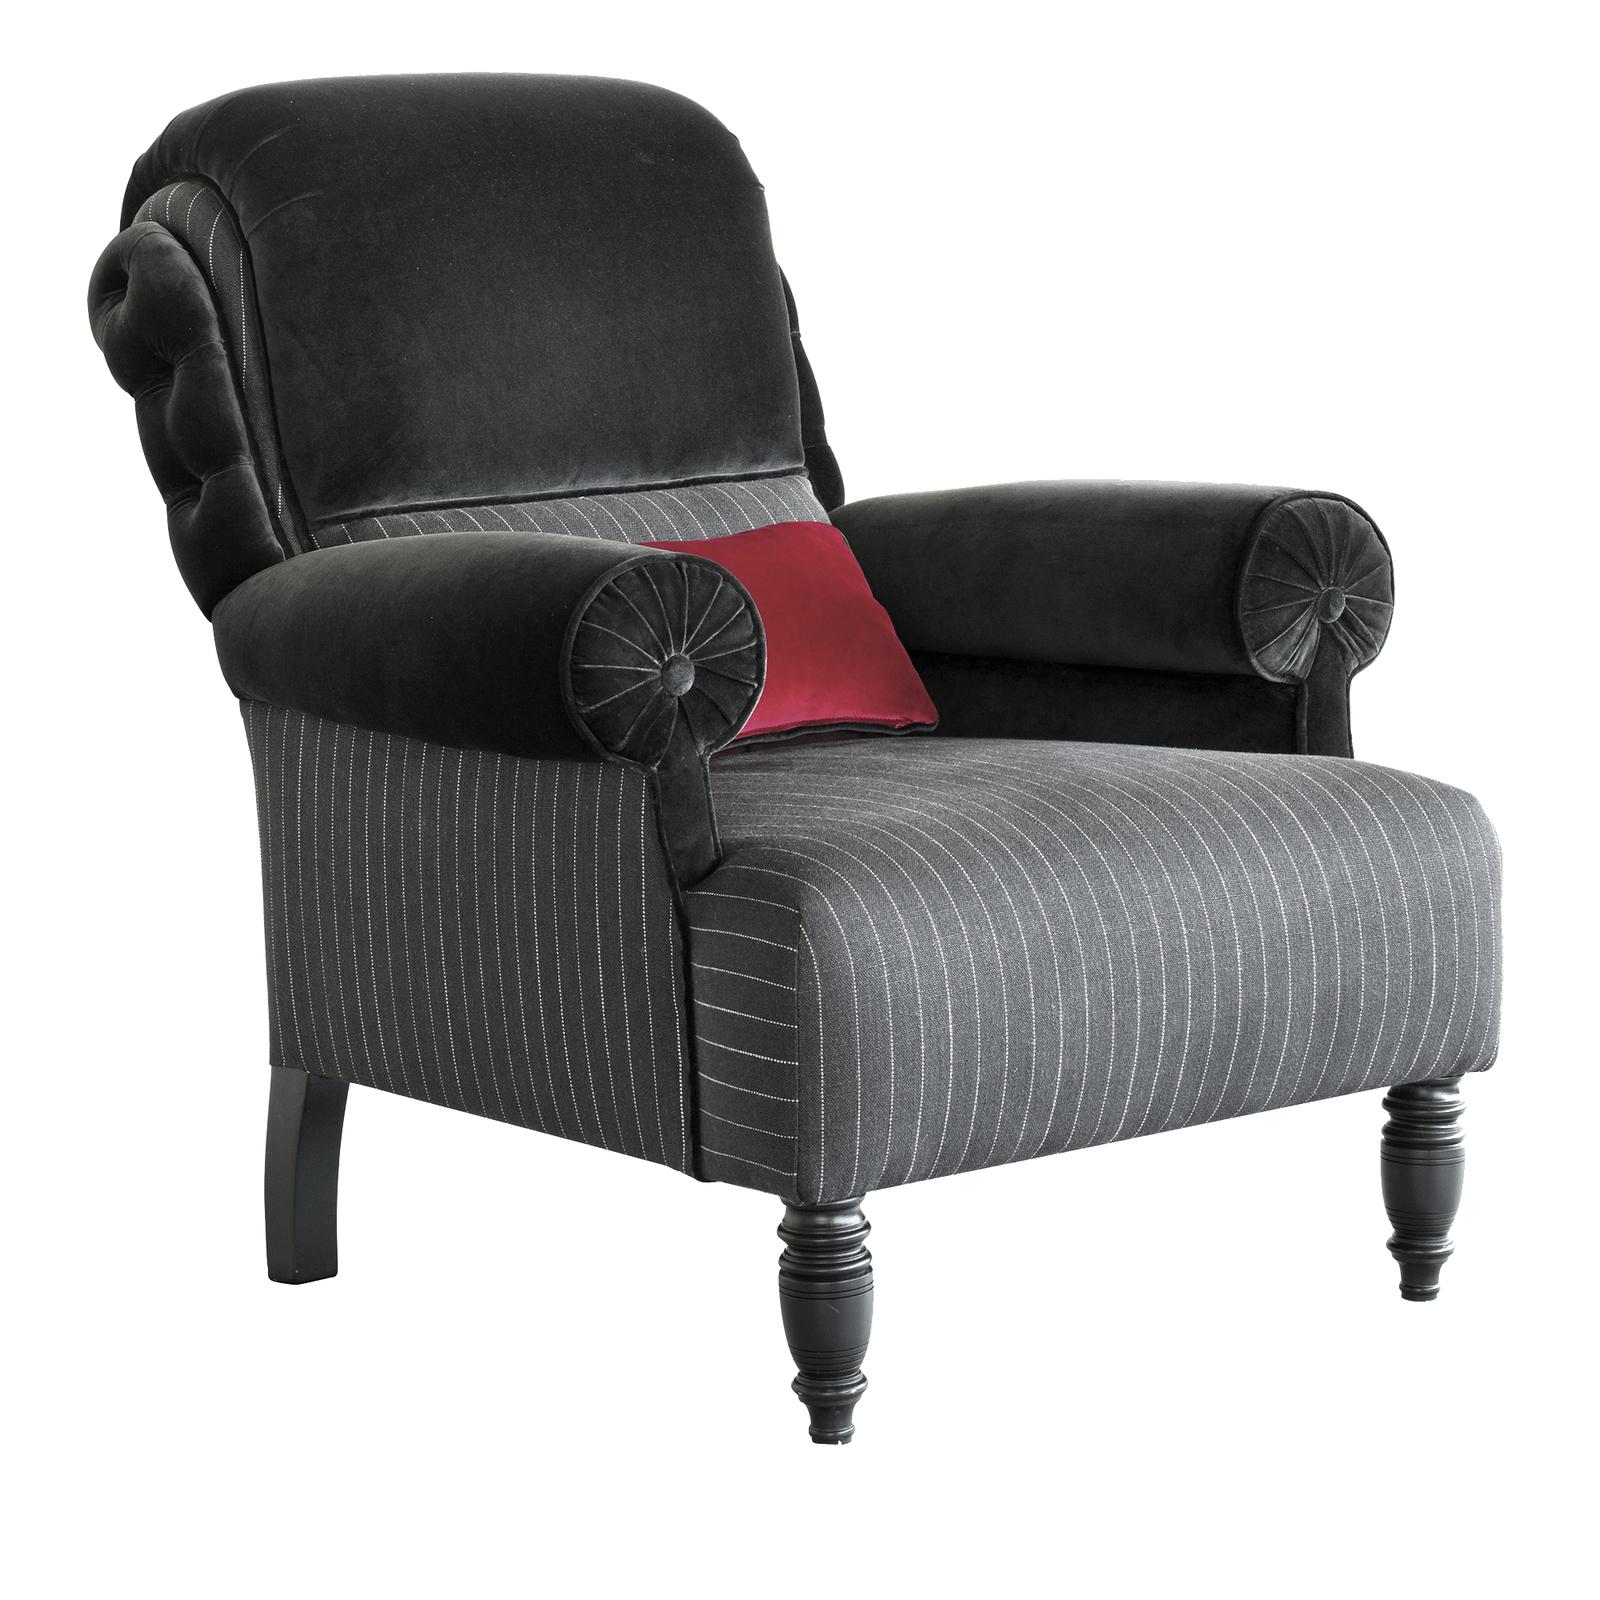 Inspired by the chic elegance and bold style of Art Deco furniture, this superb armchair will be a standout addition in a classically decorated home or a striking contrasting piece in a contemporary decor. Its round base is covered with fringes and